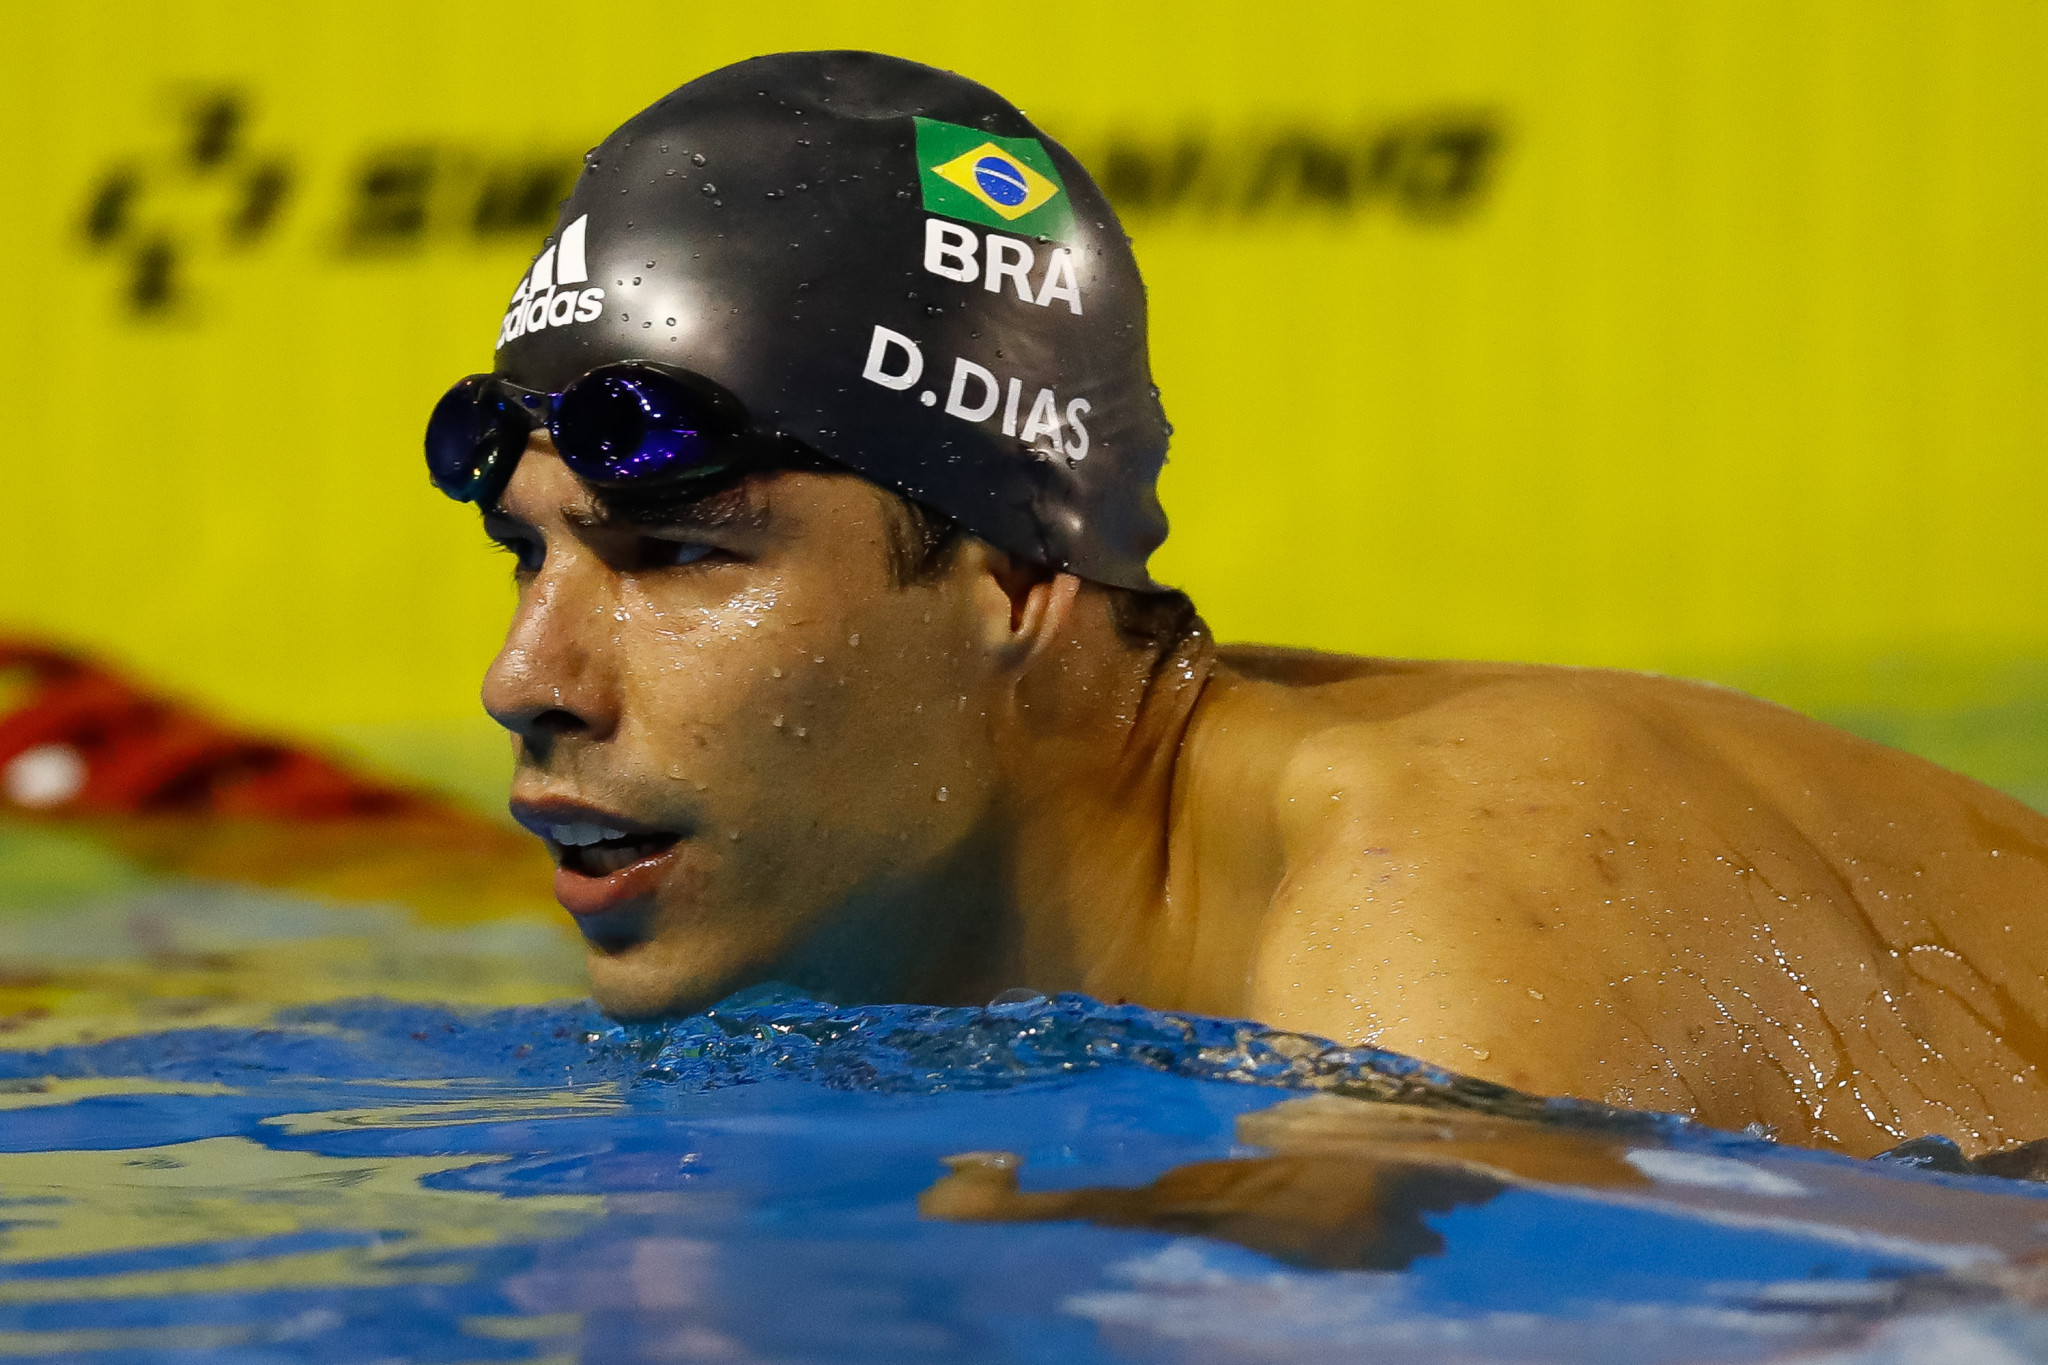 Multiple Paralympic champion Daniel Dias sealed a staggering 25th World Championships gold medal in Mexico City ©Getty Images